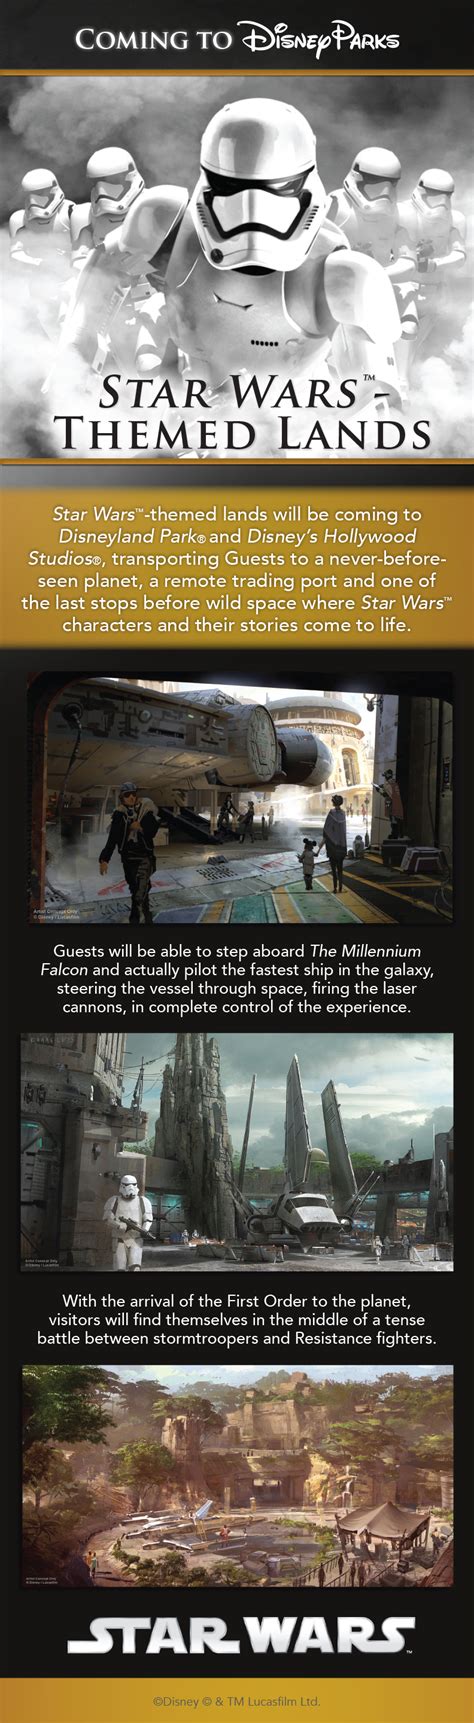 Exciting New Details Have Been Announced For The Star Wars Themed Lands